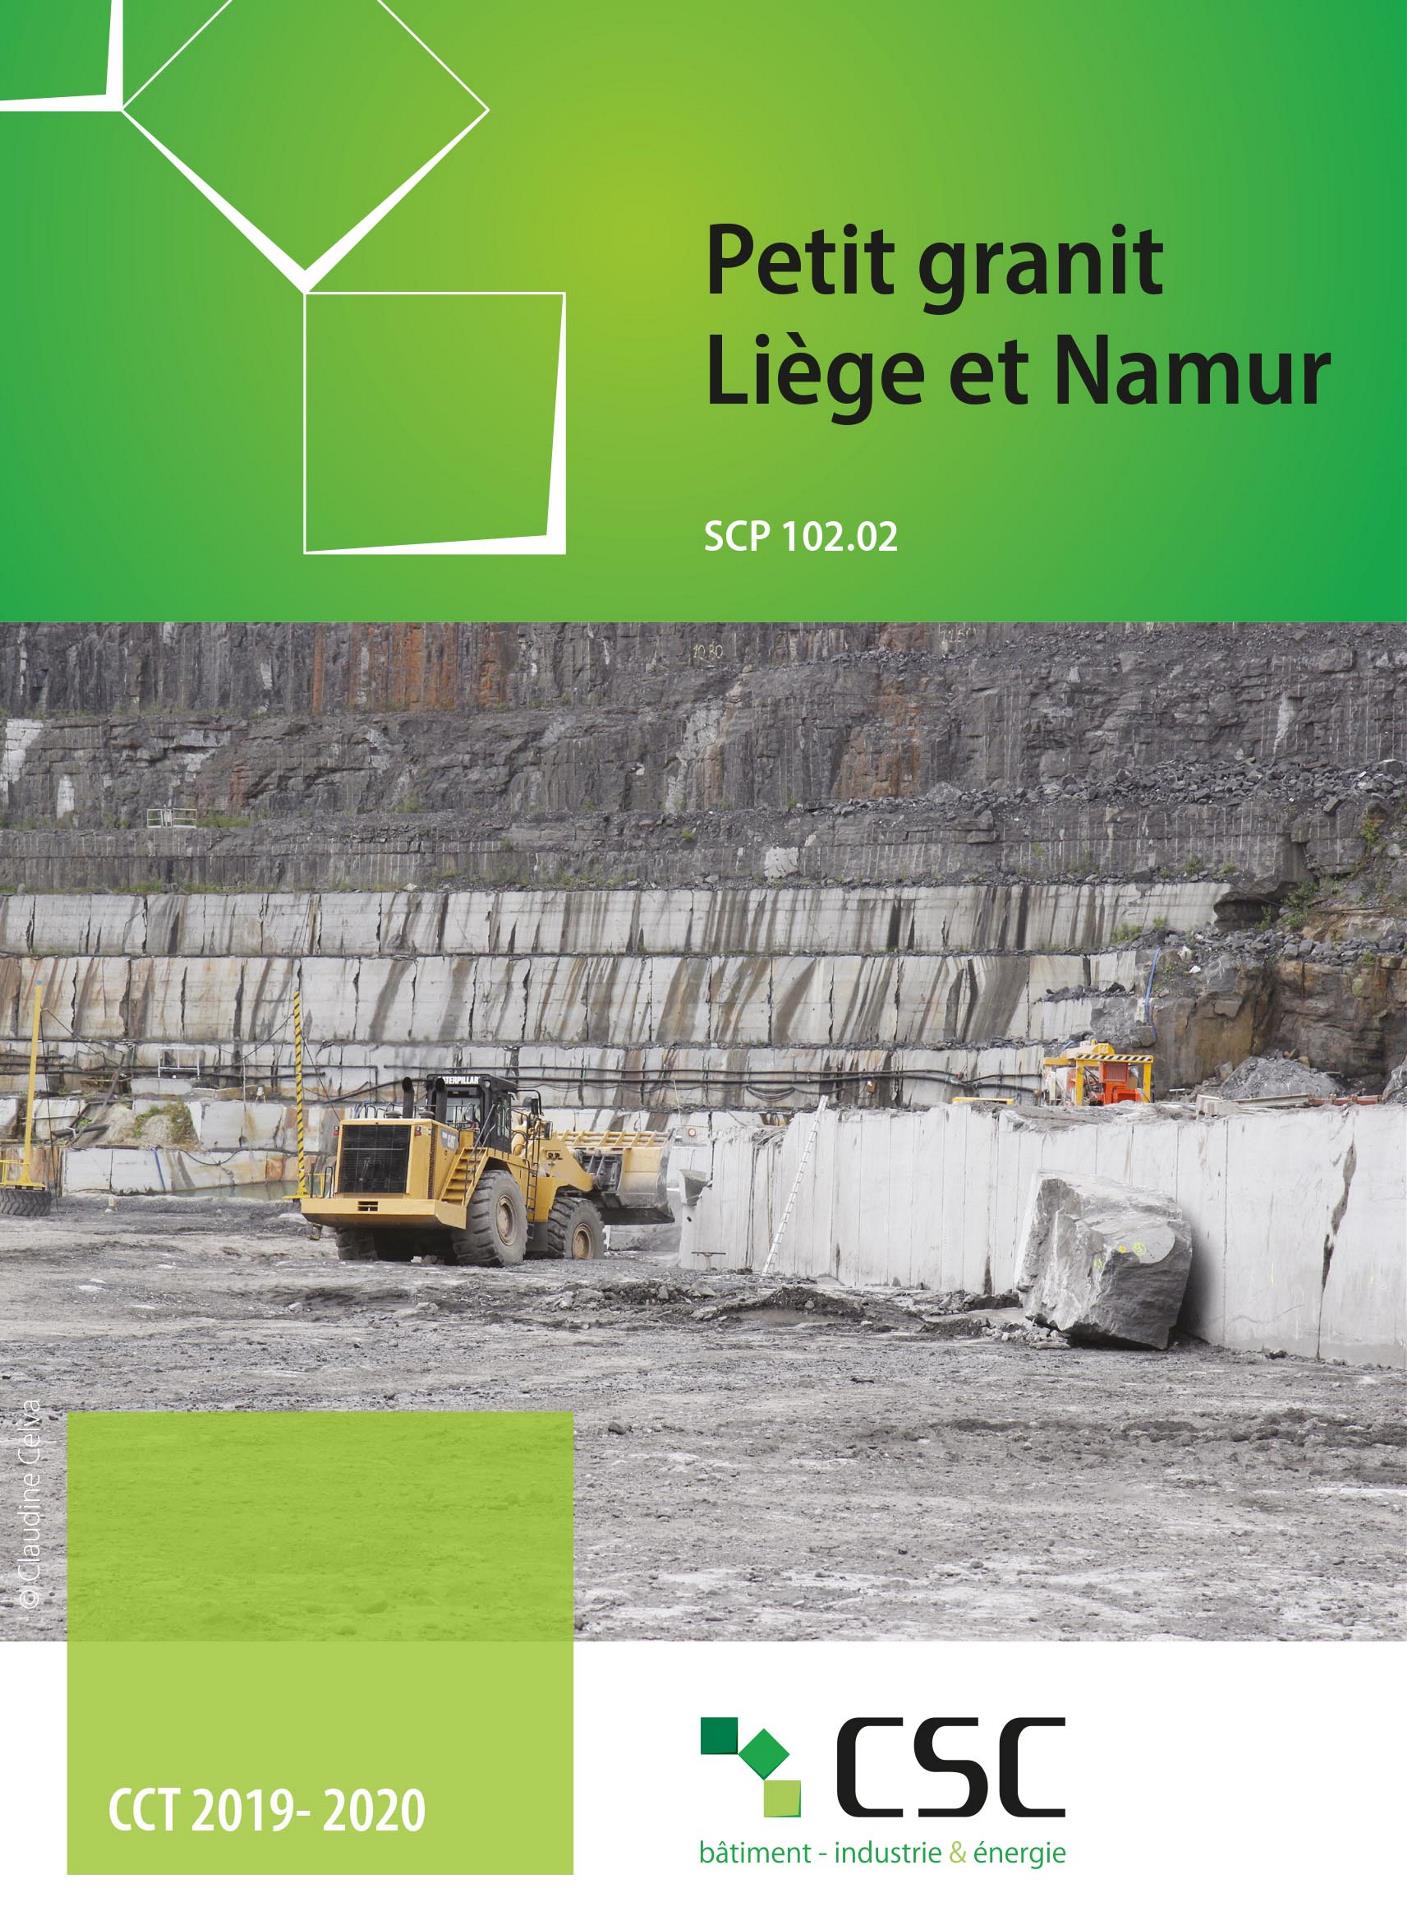 Couverture-guide-CCT-SCP10202-2019-2020